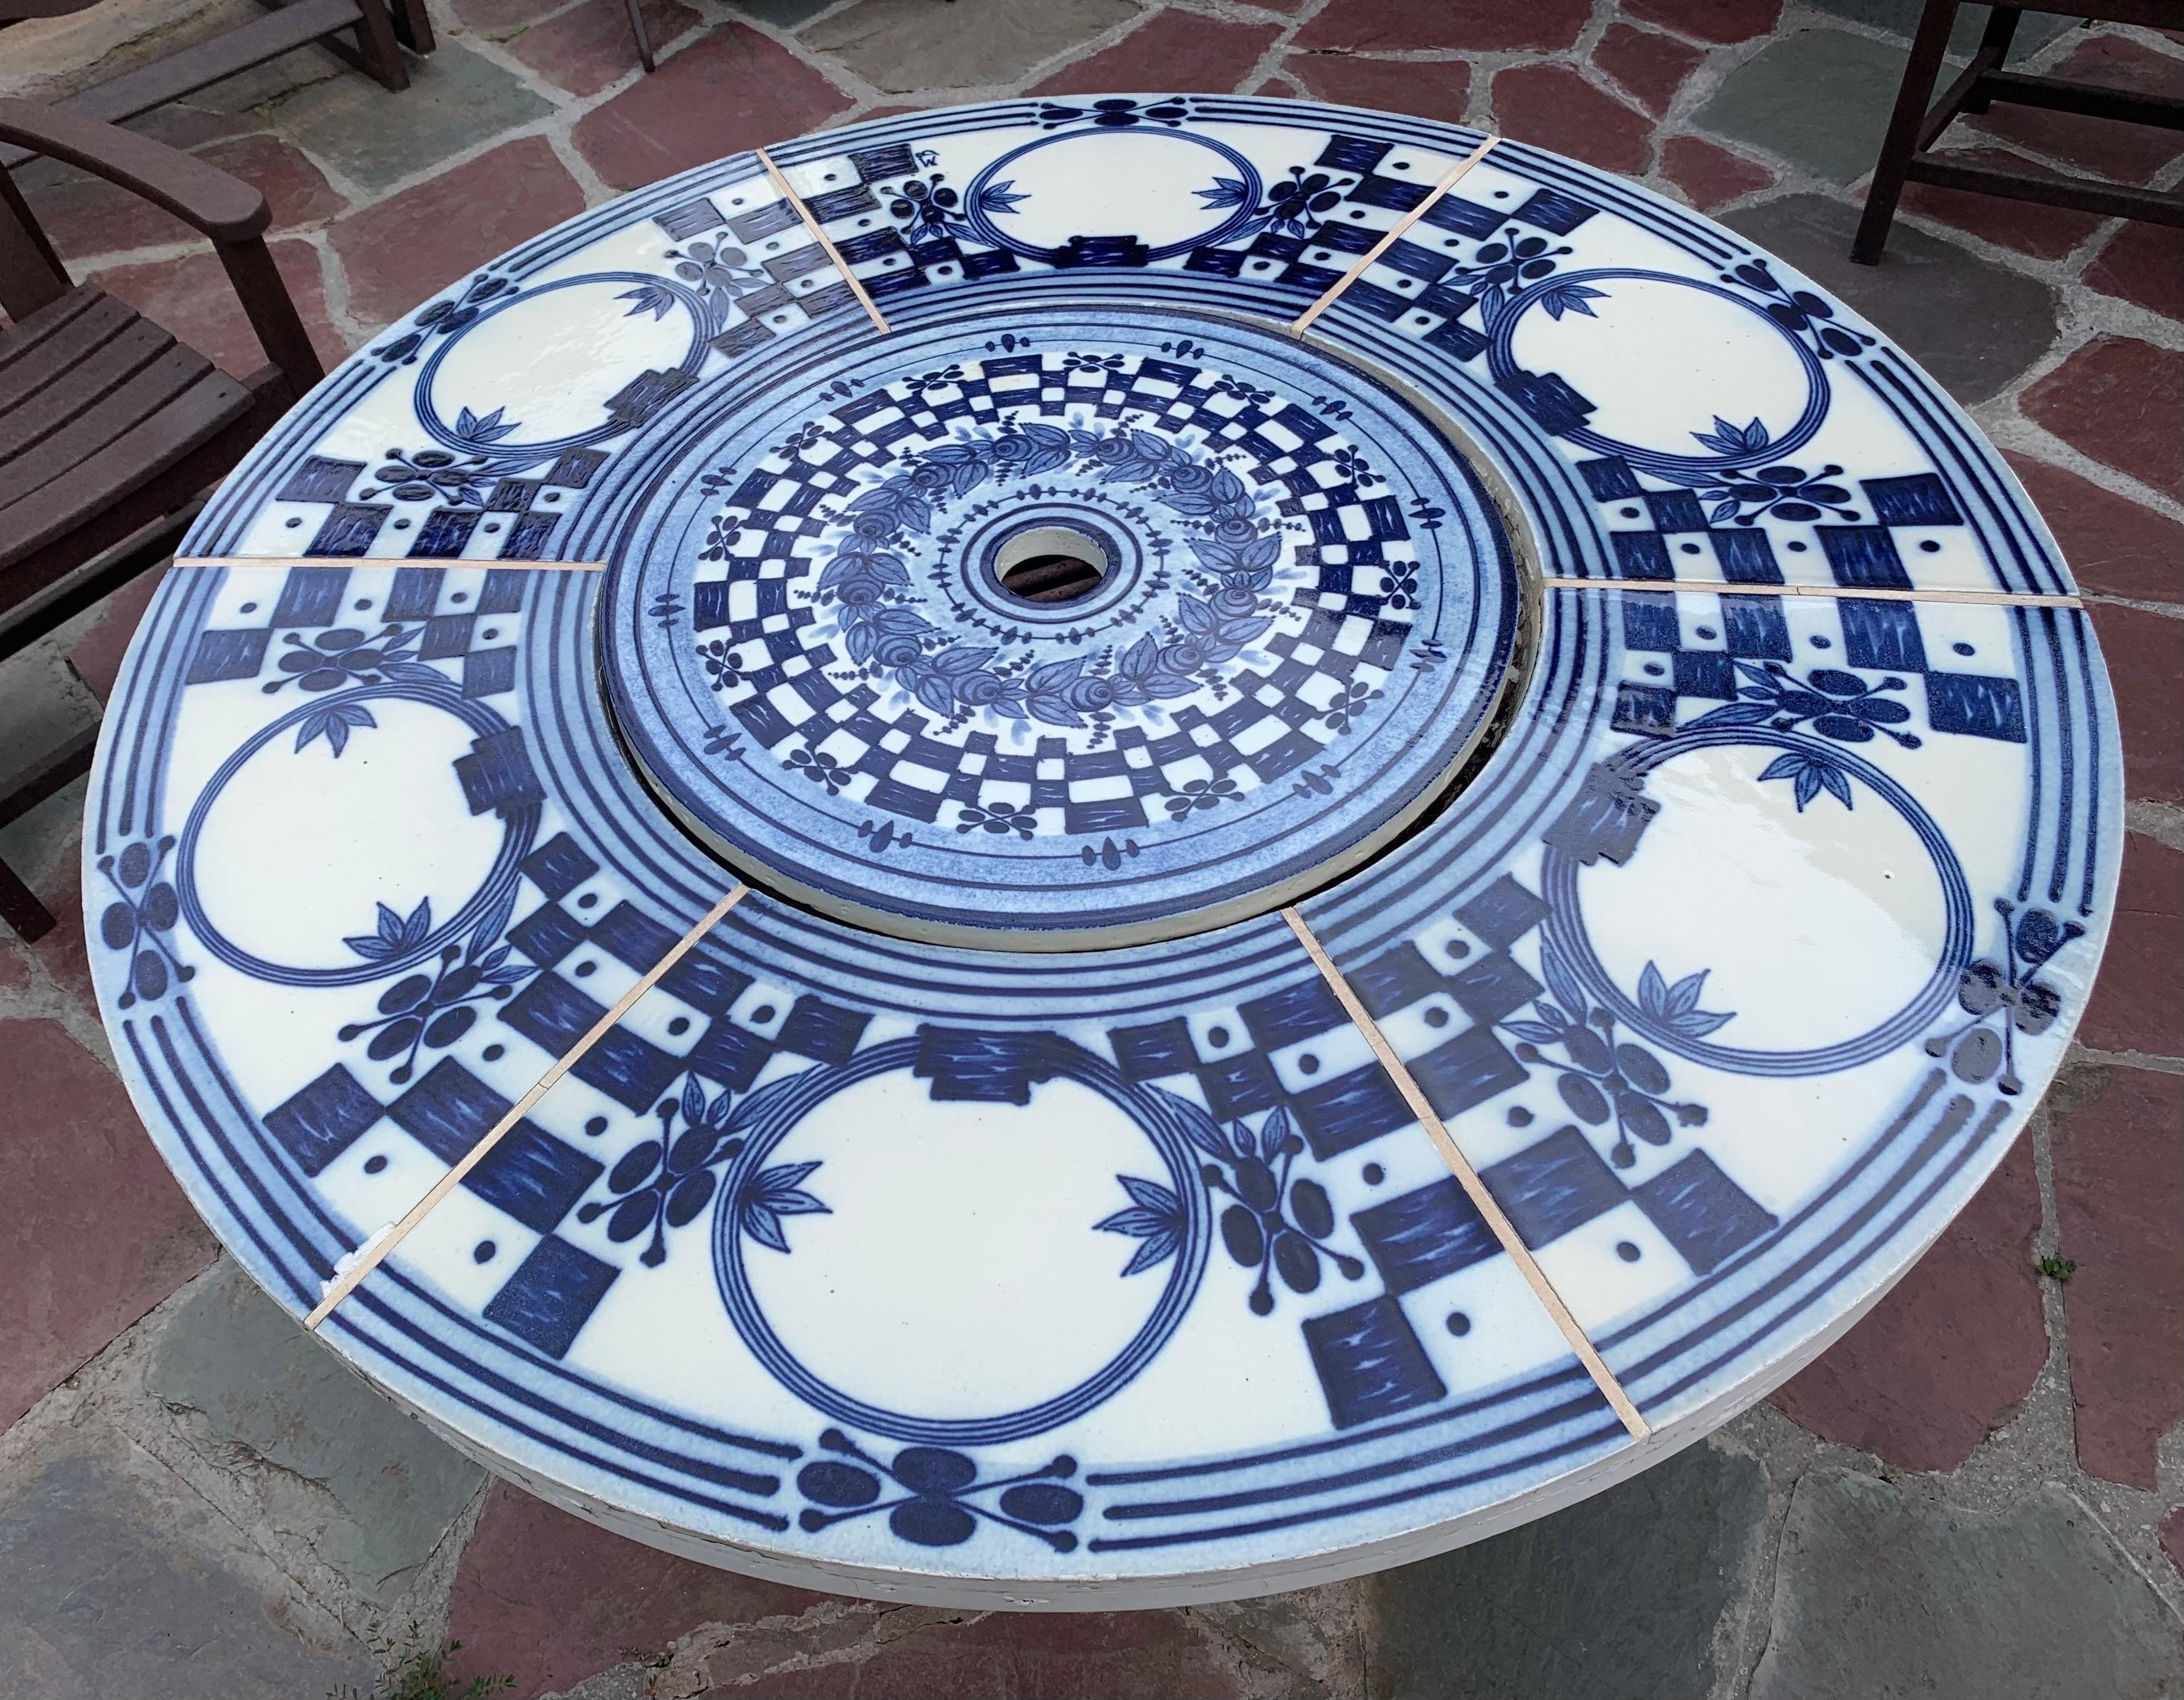 French Provincial 1968 Bjørn Wiinblad for Rosenthal Hibachi Grill Table With Hand-Painted Tile Top